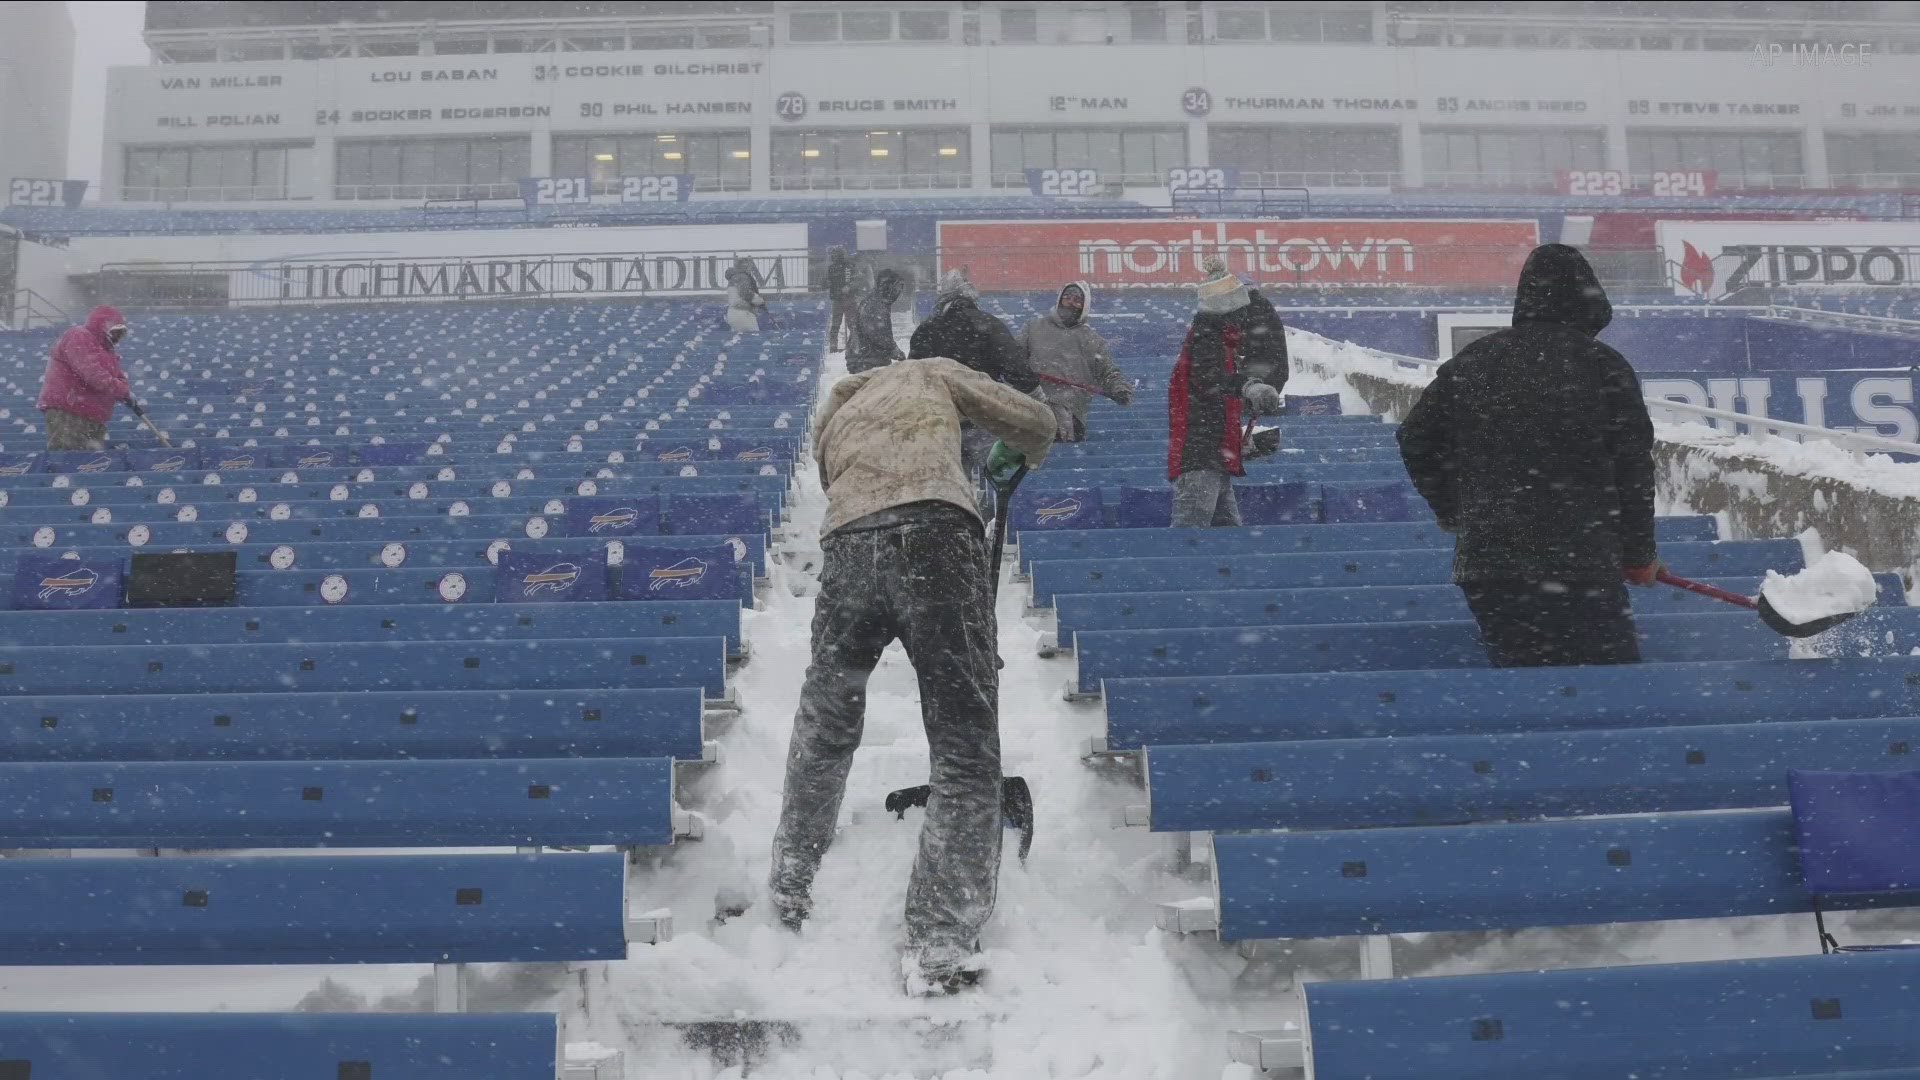 Race against time to clear Highmark stadium in time for Bills 4:30 kickoff